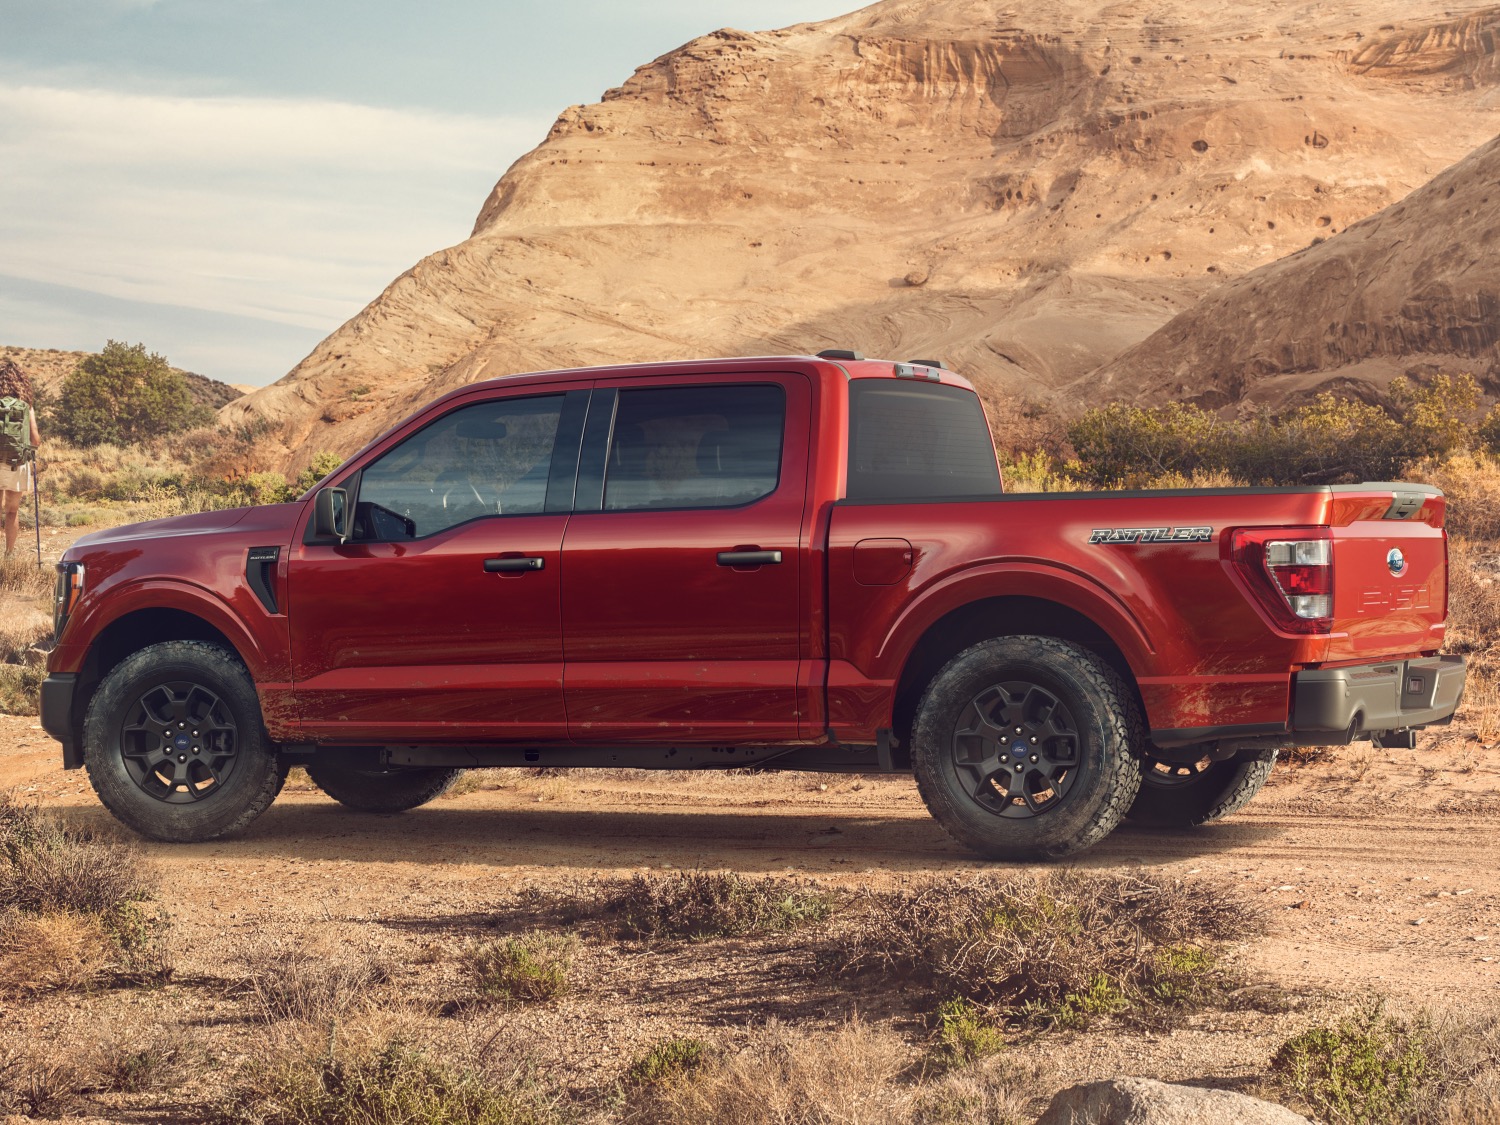 The Ford F-150 Lightning Is Edmunds Top Rated Best of the Best for